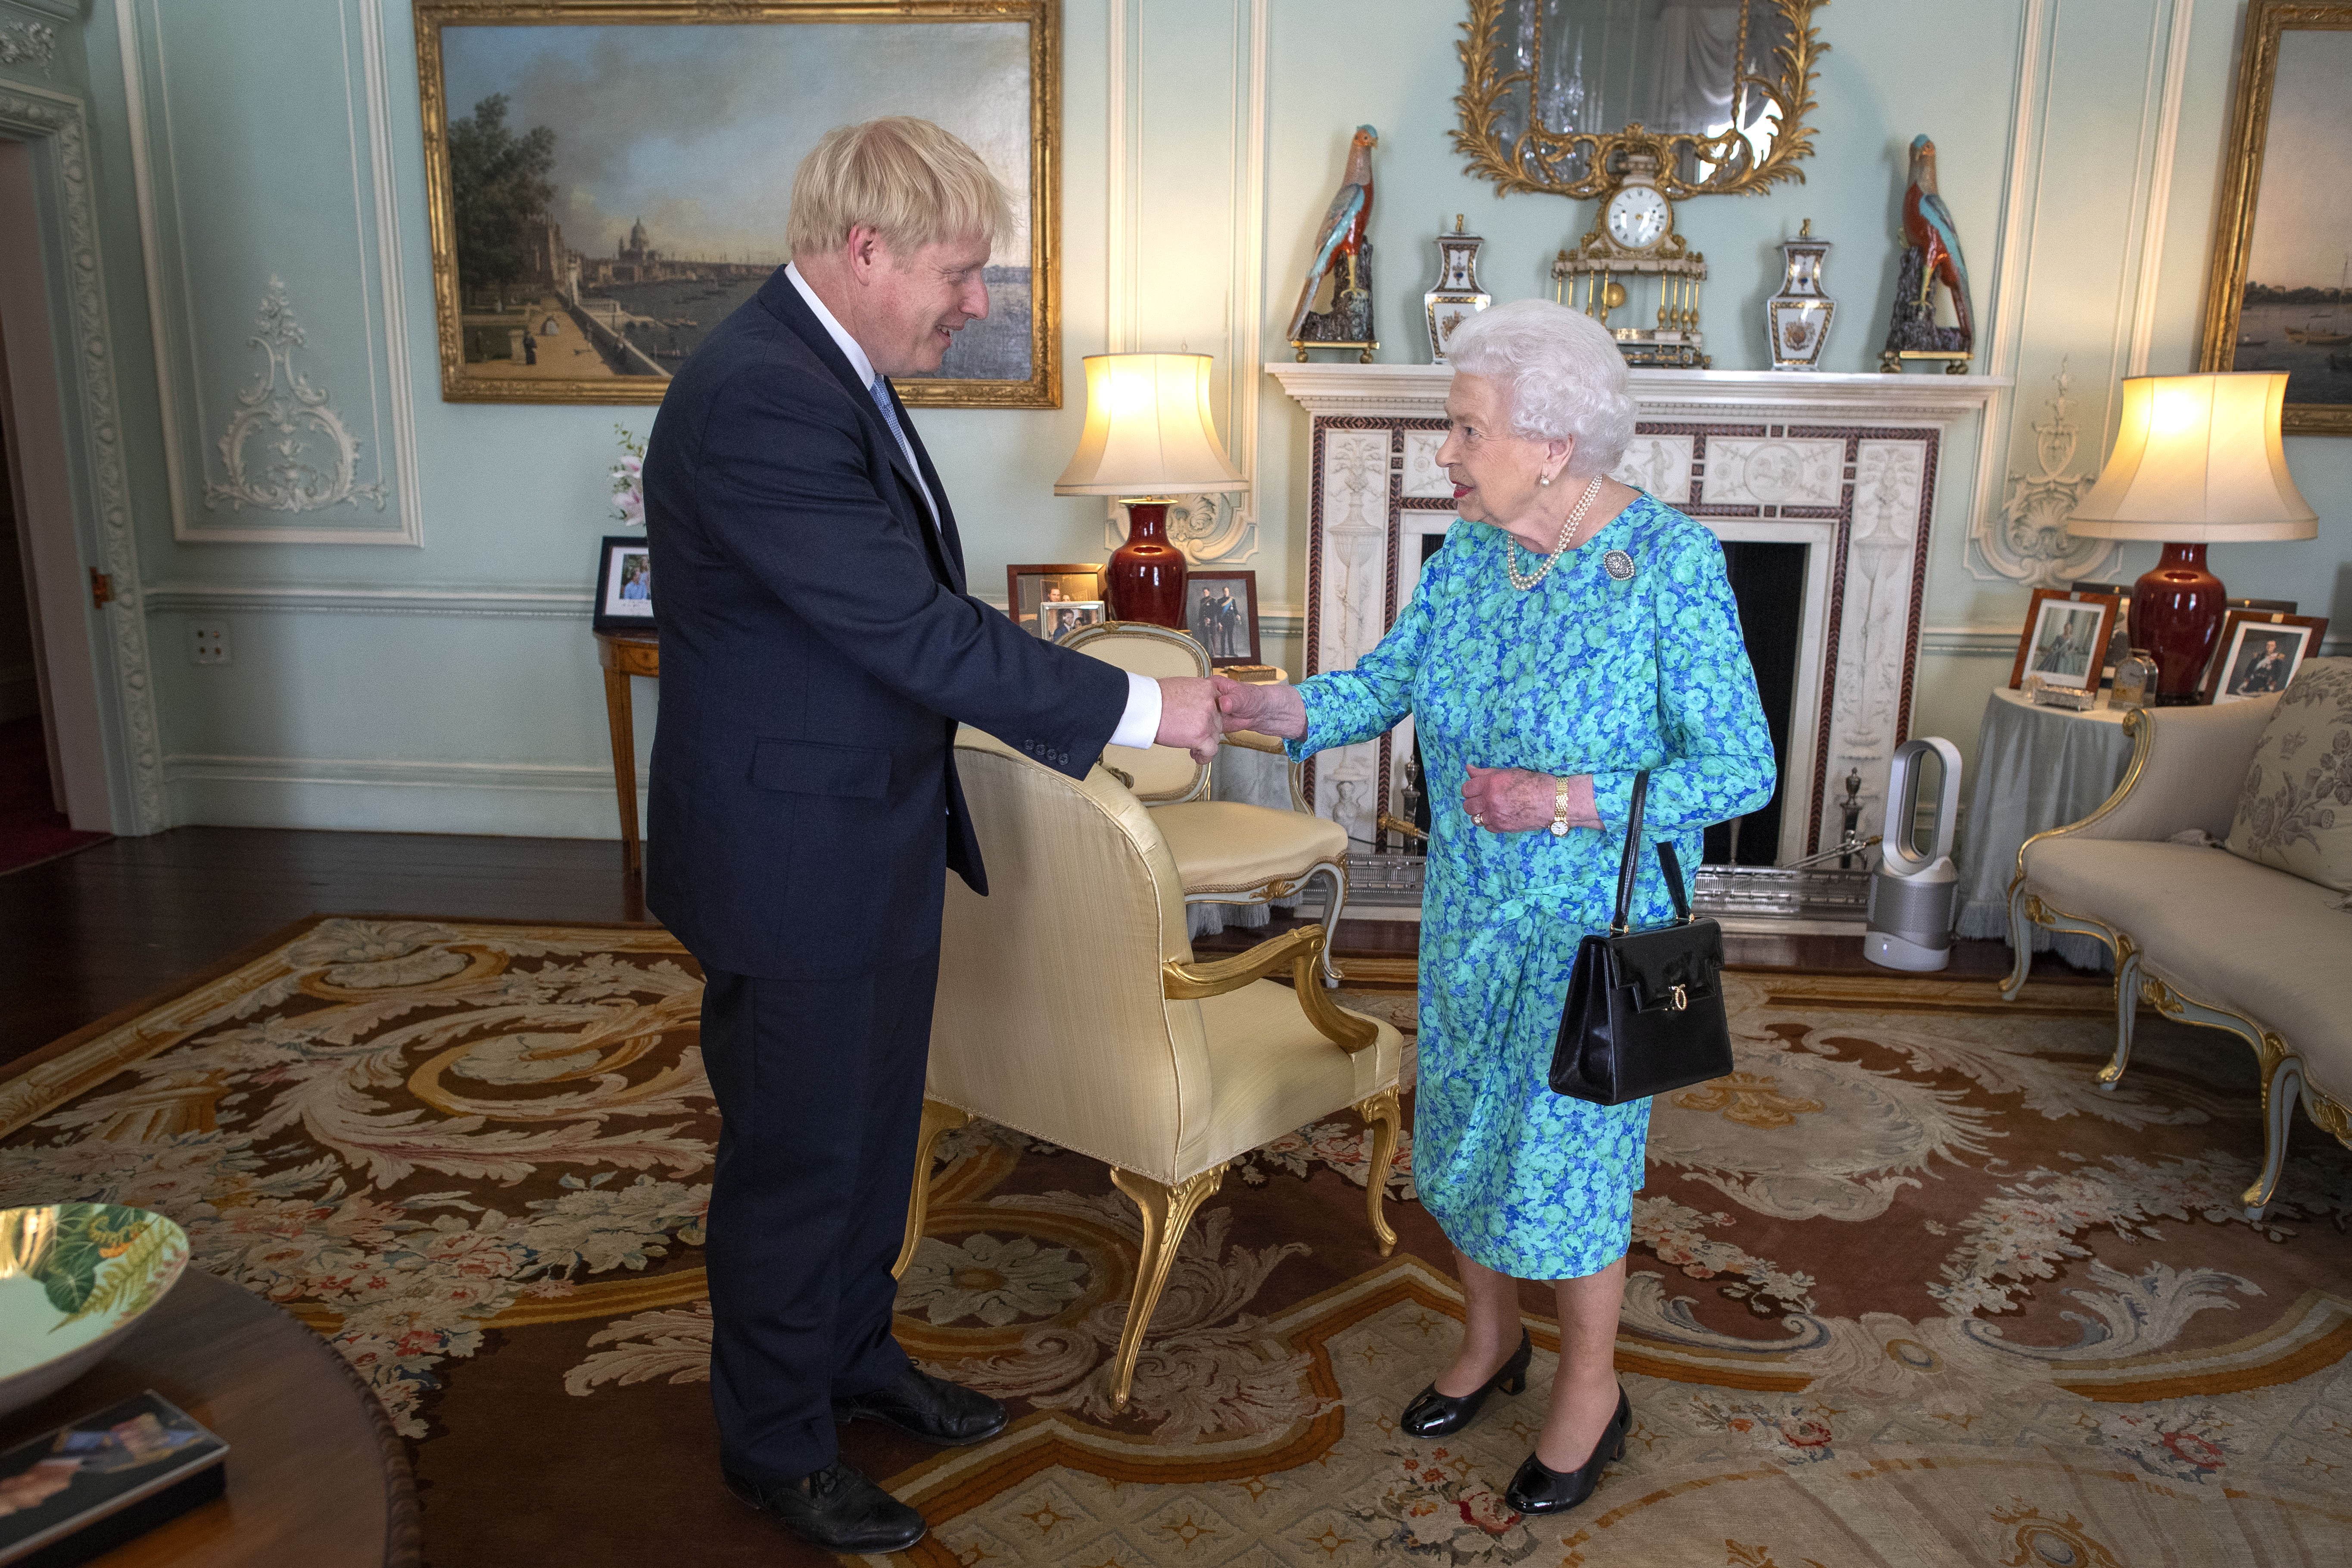 Queen Elizabeth II welcomes Boris Johnson in Buckingham Palace on July 24, 2019, in London, England. | Source: Getty Images.